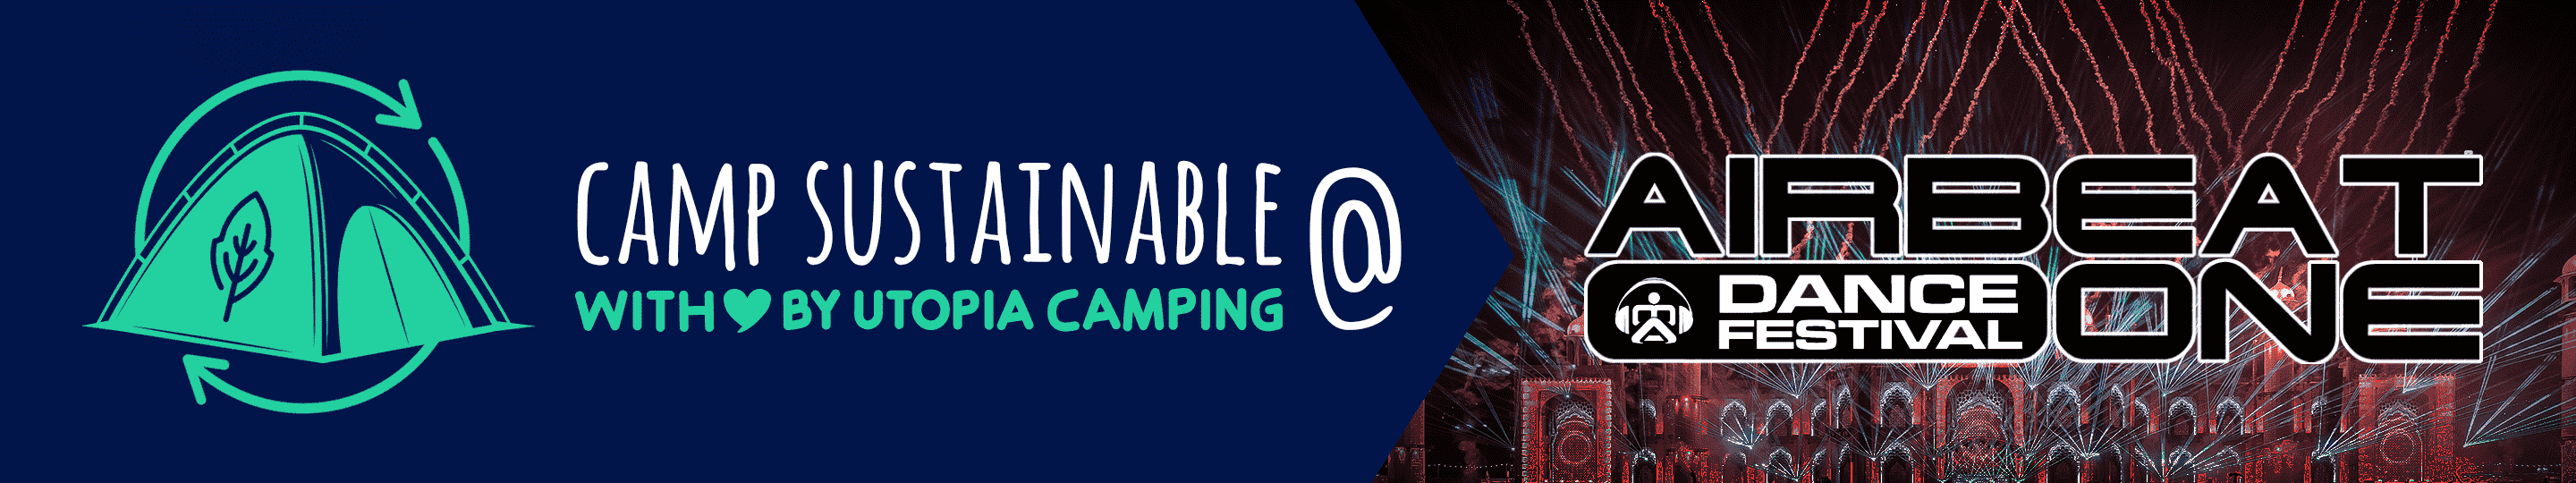 Sustainable camping solutions for festival-goers - Utopia Camping - With our sustainable solutions at festivals, we tackle piles of garbage full of camping gear by reusing camping stuff left behind. rent a tent, festival, camping equipment for rent
Air beat one festival